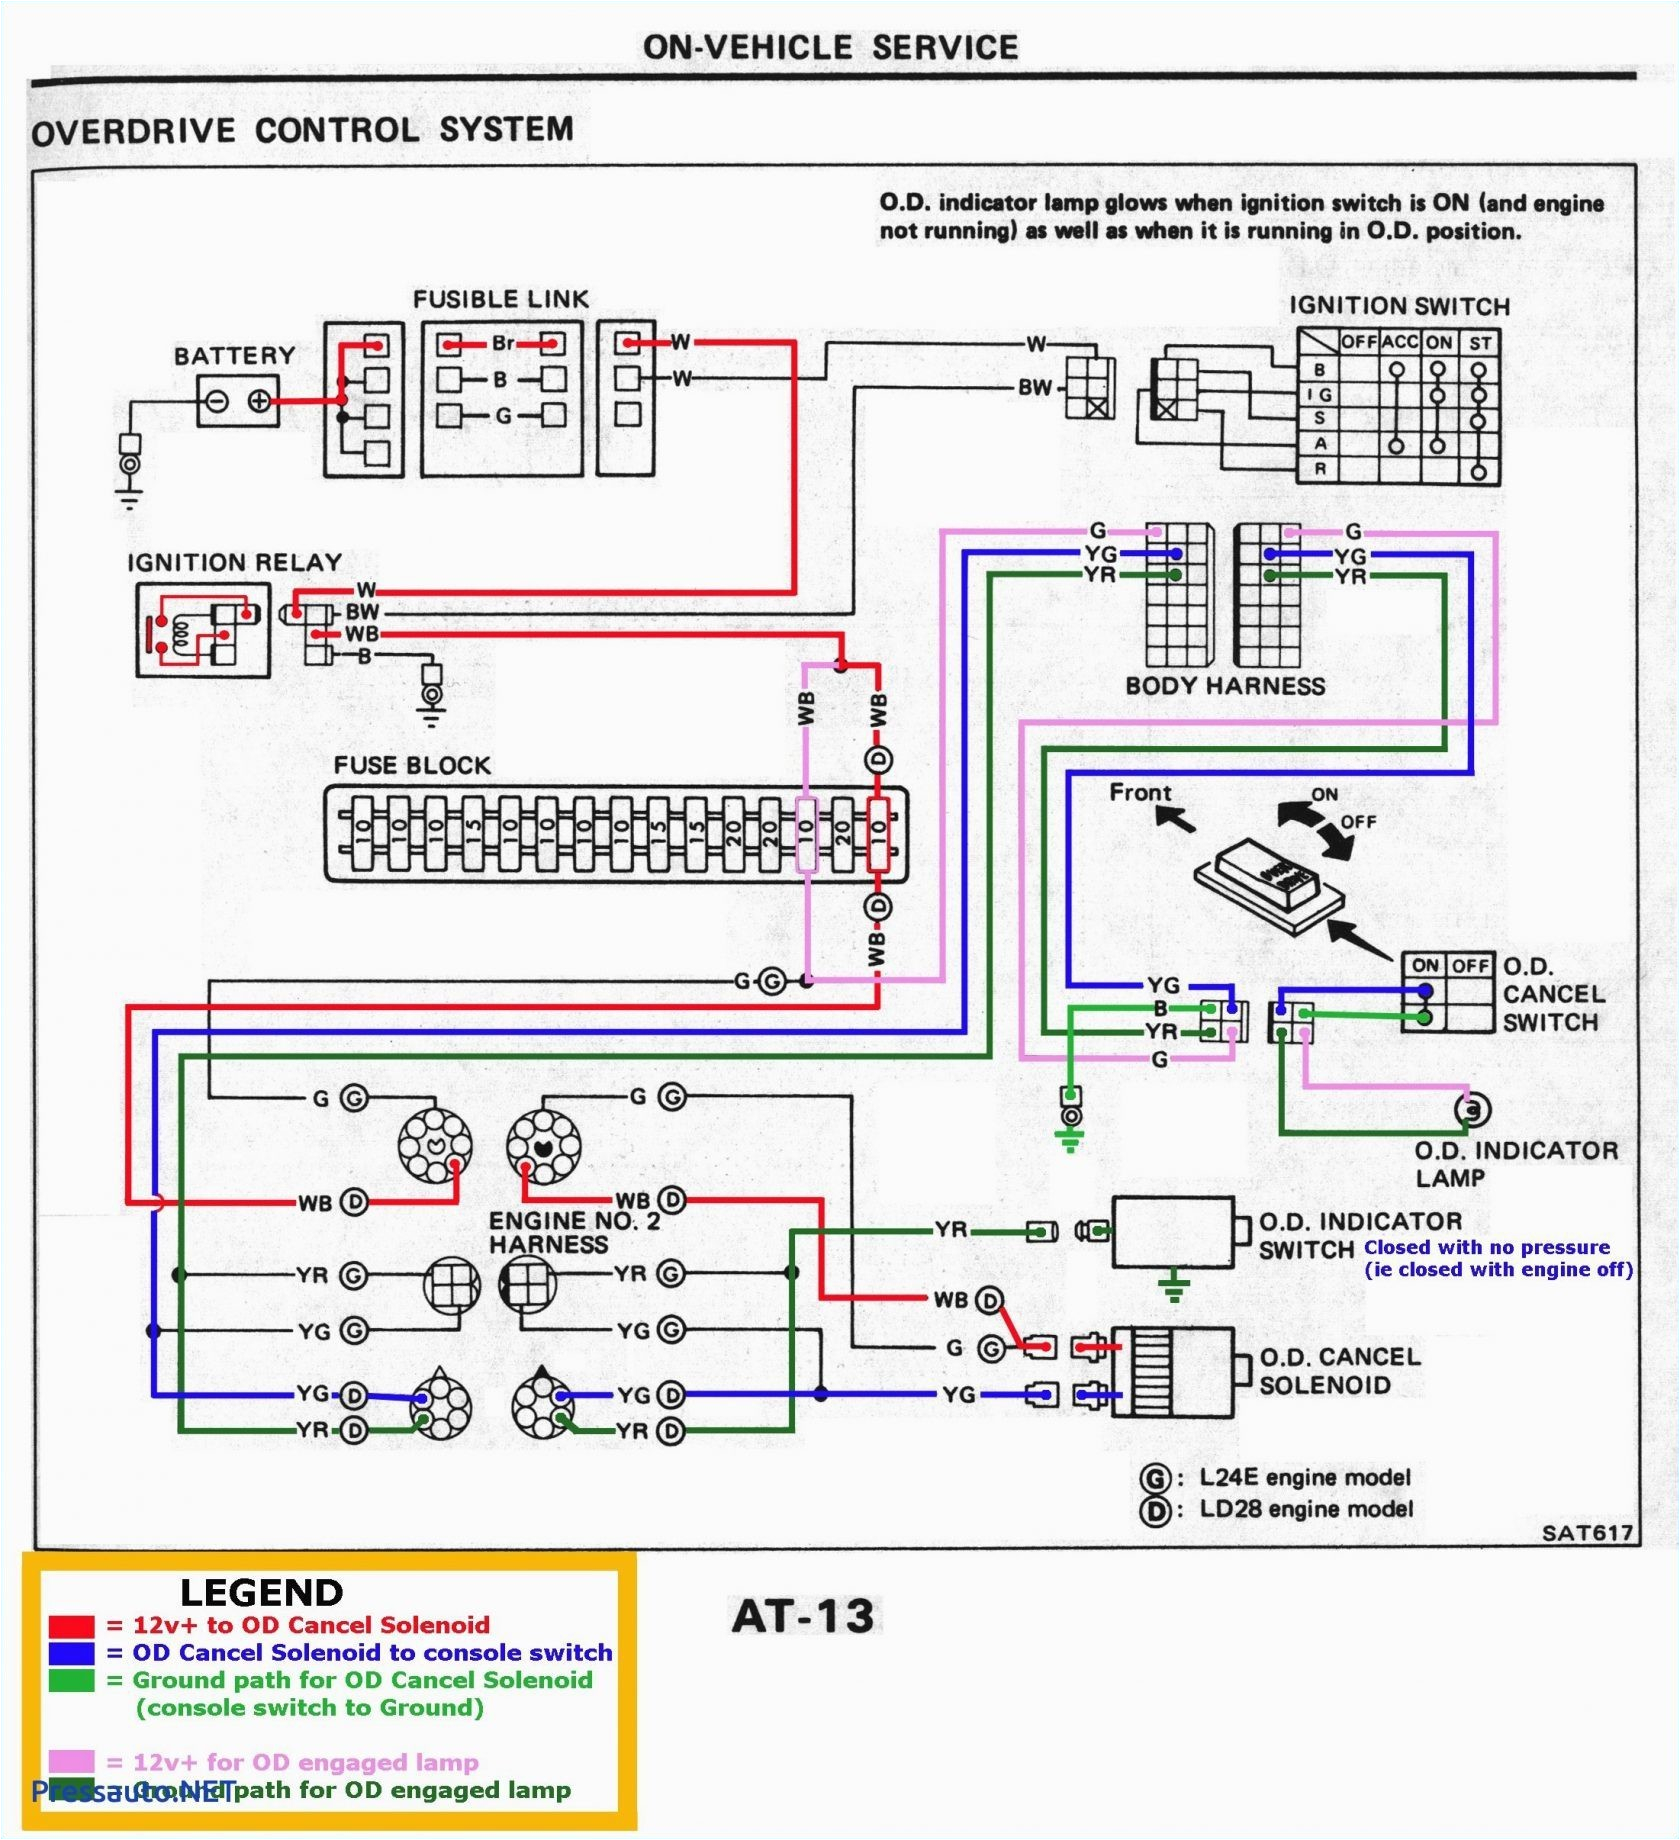 free wiring diagrams for boats wiring diagram wiring boat diagram free download schematic